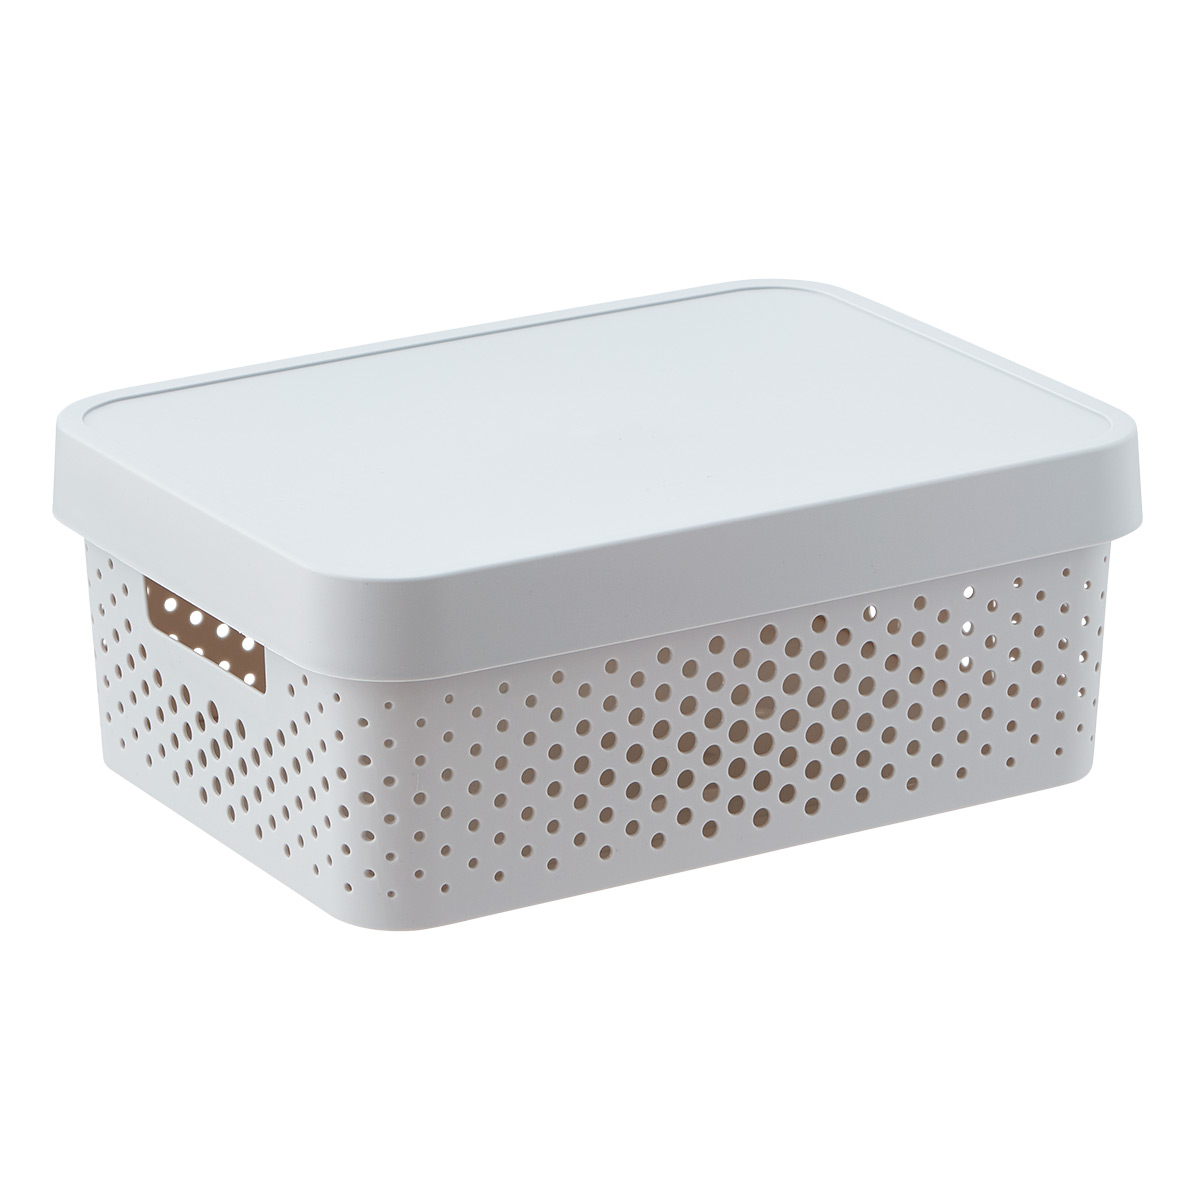 Curver Medium Infinity Box w/ Lid Light Grey, 14 x 10-1/2 x 5-3/8 H | The Container Store